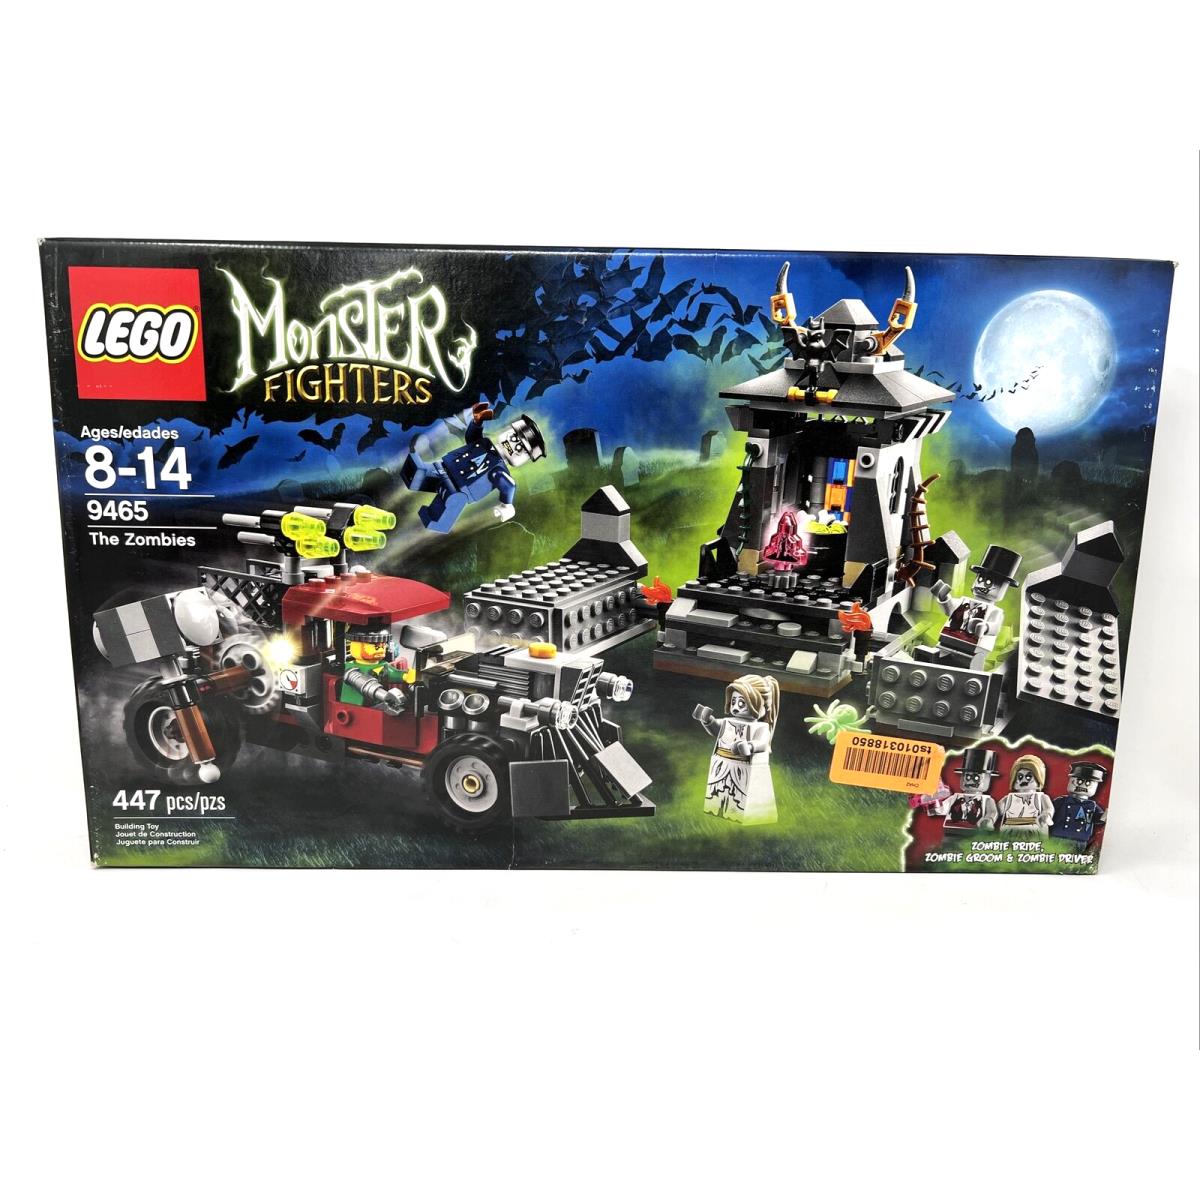 Lego Monster Fighters The Zombies 9465